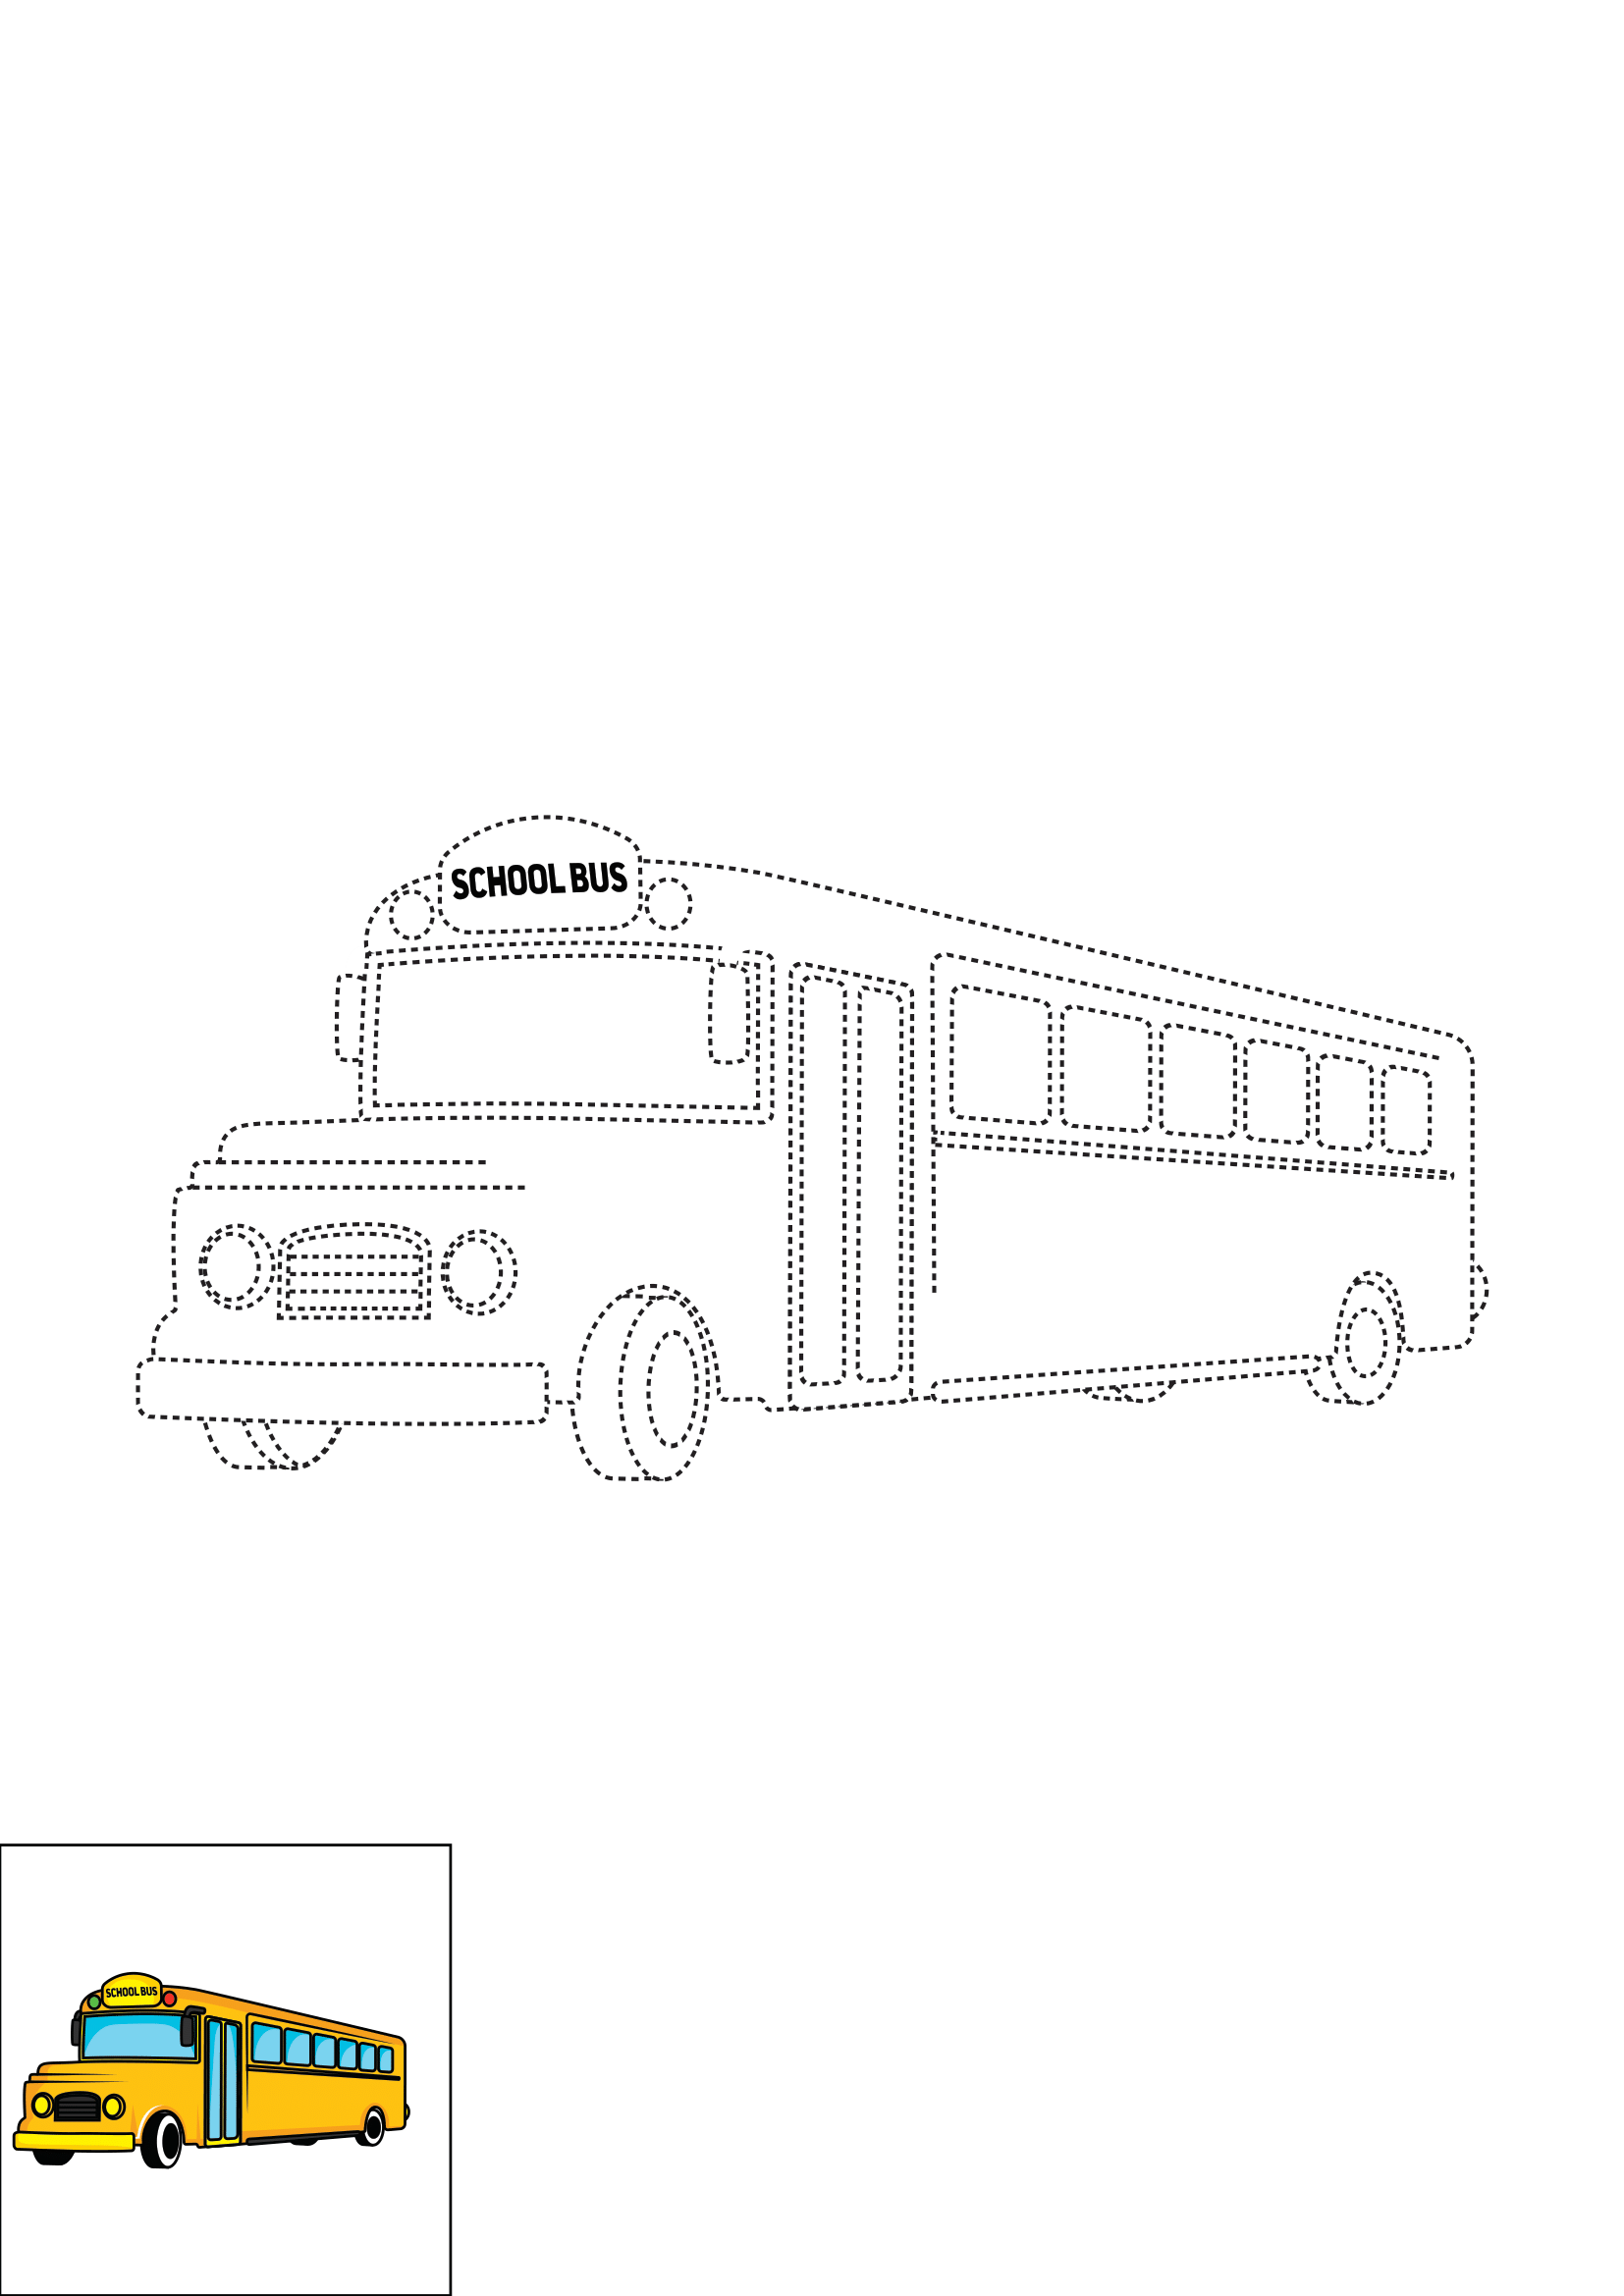 How to Draw A School Bus Step by Step Printable Dotted